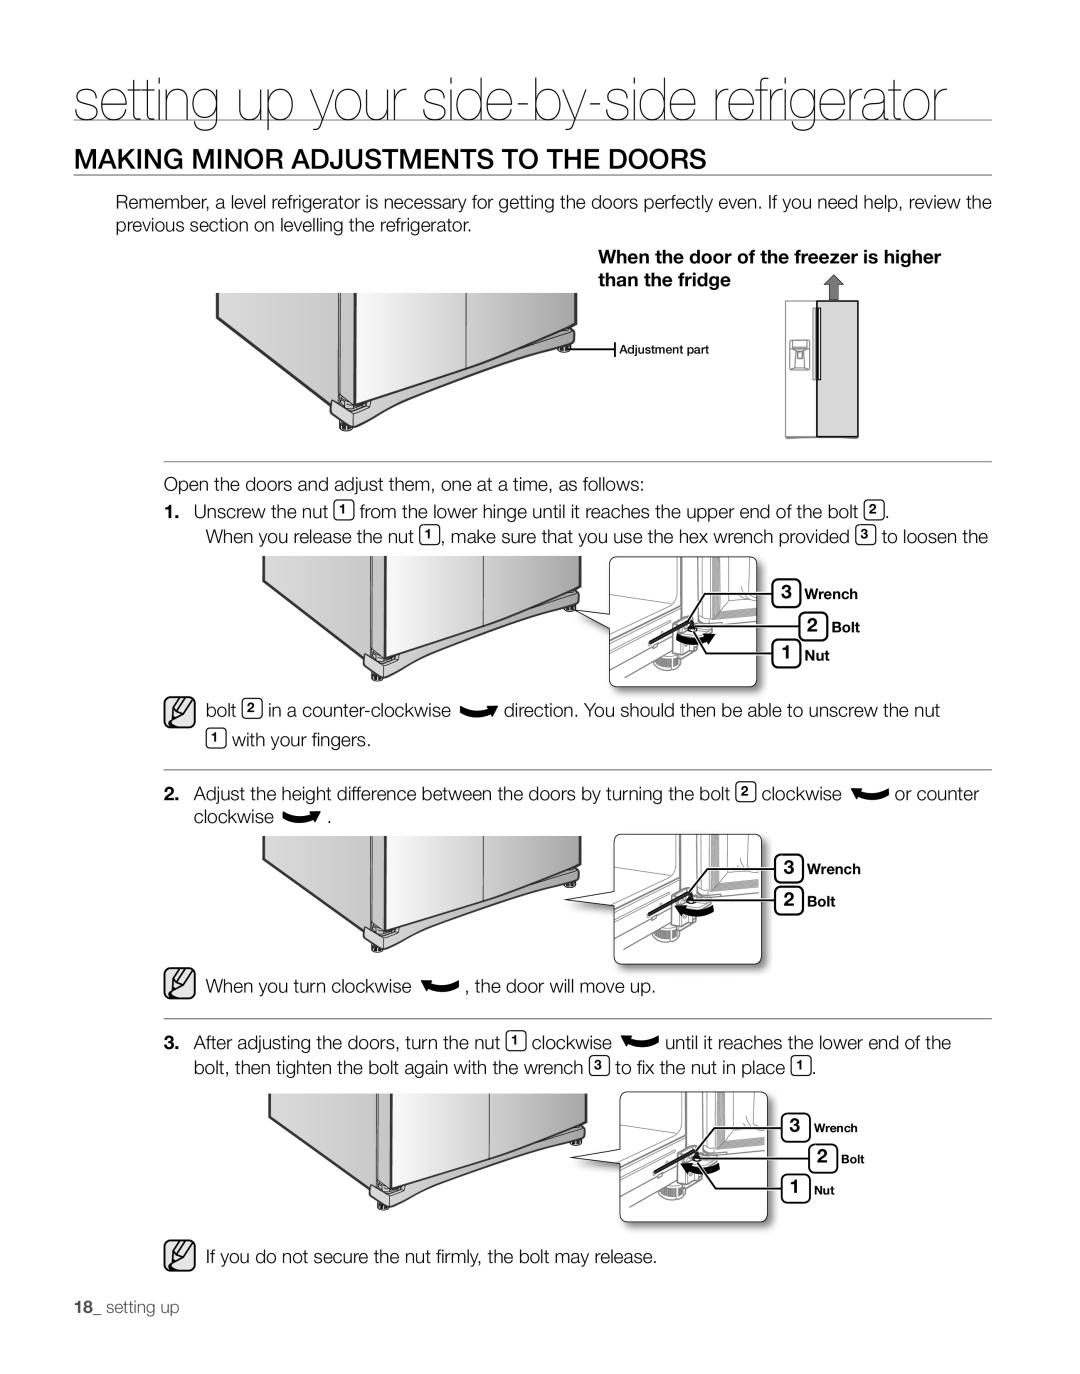 Samsung RS267TDPN user manual Making Minor Adjustments To The Doors, setting up your side-by-side refrigerator 